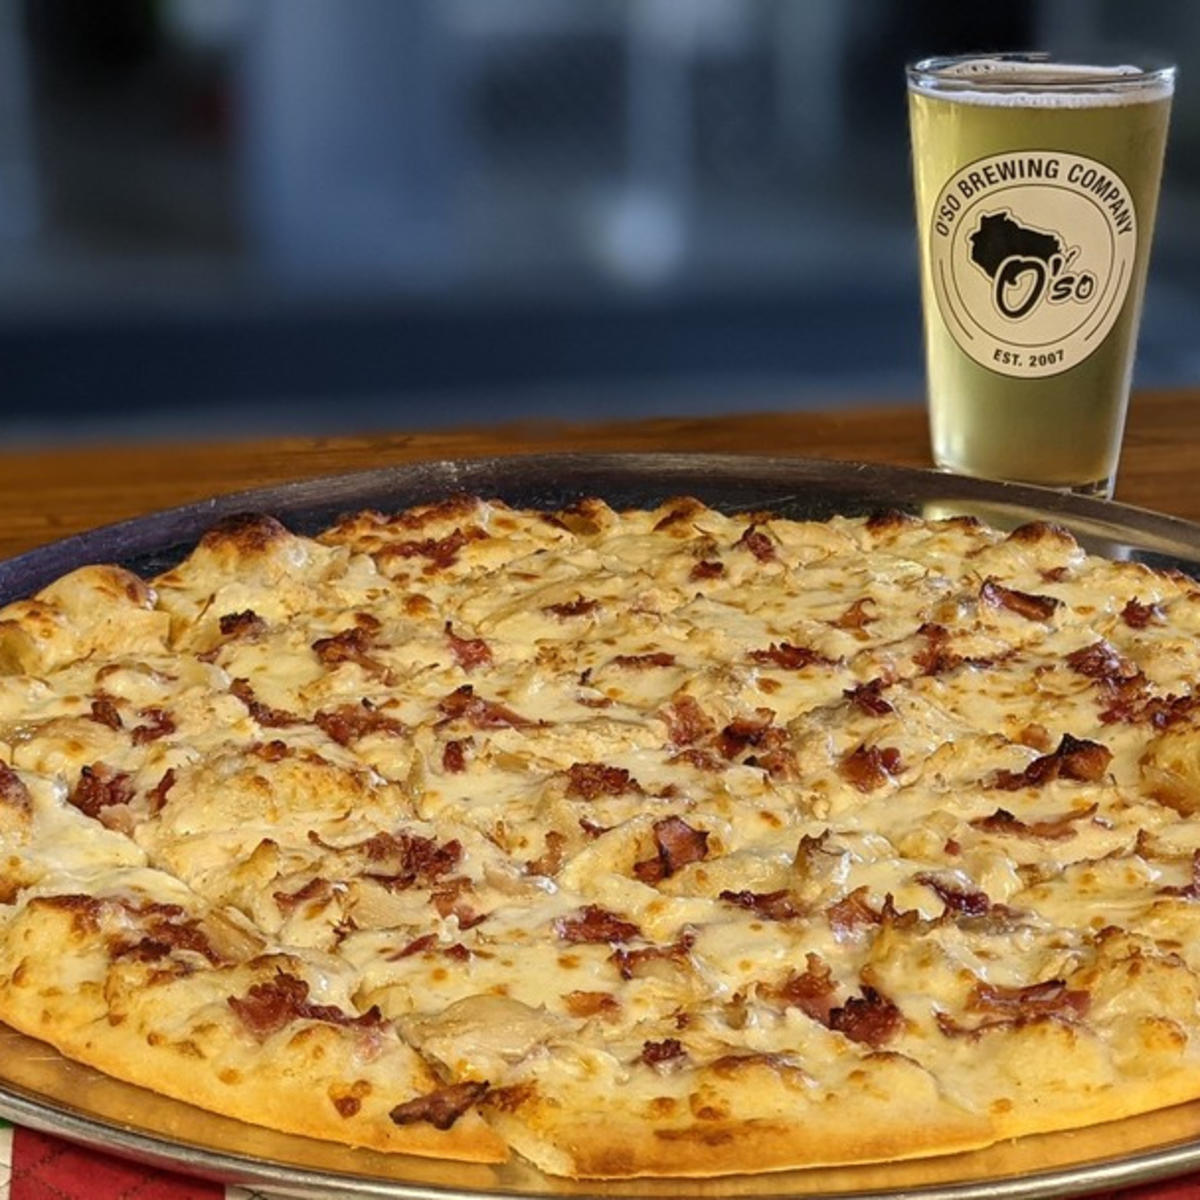 Snag a slice and grab a brew with a stop at O'so Brewing in the Stevens Point Area.